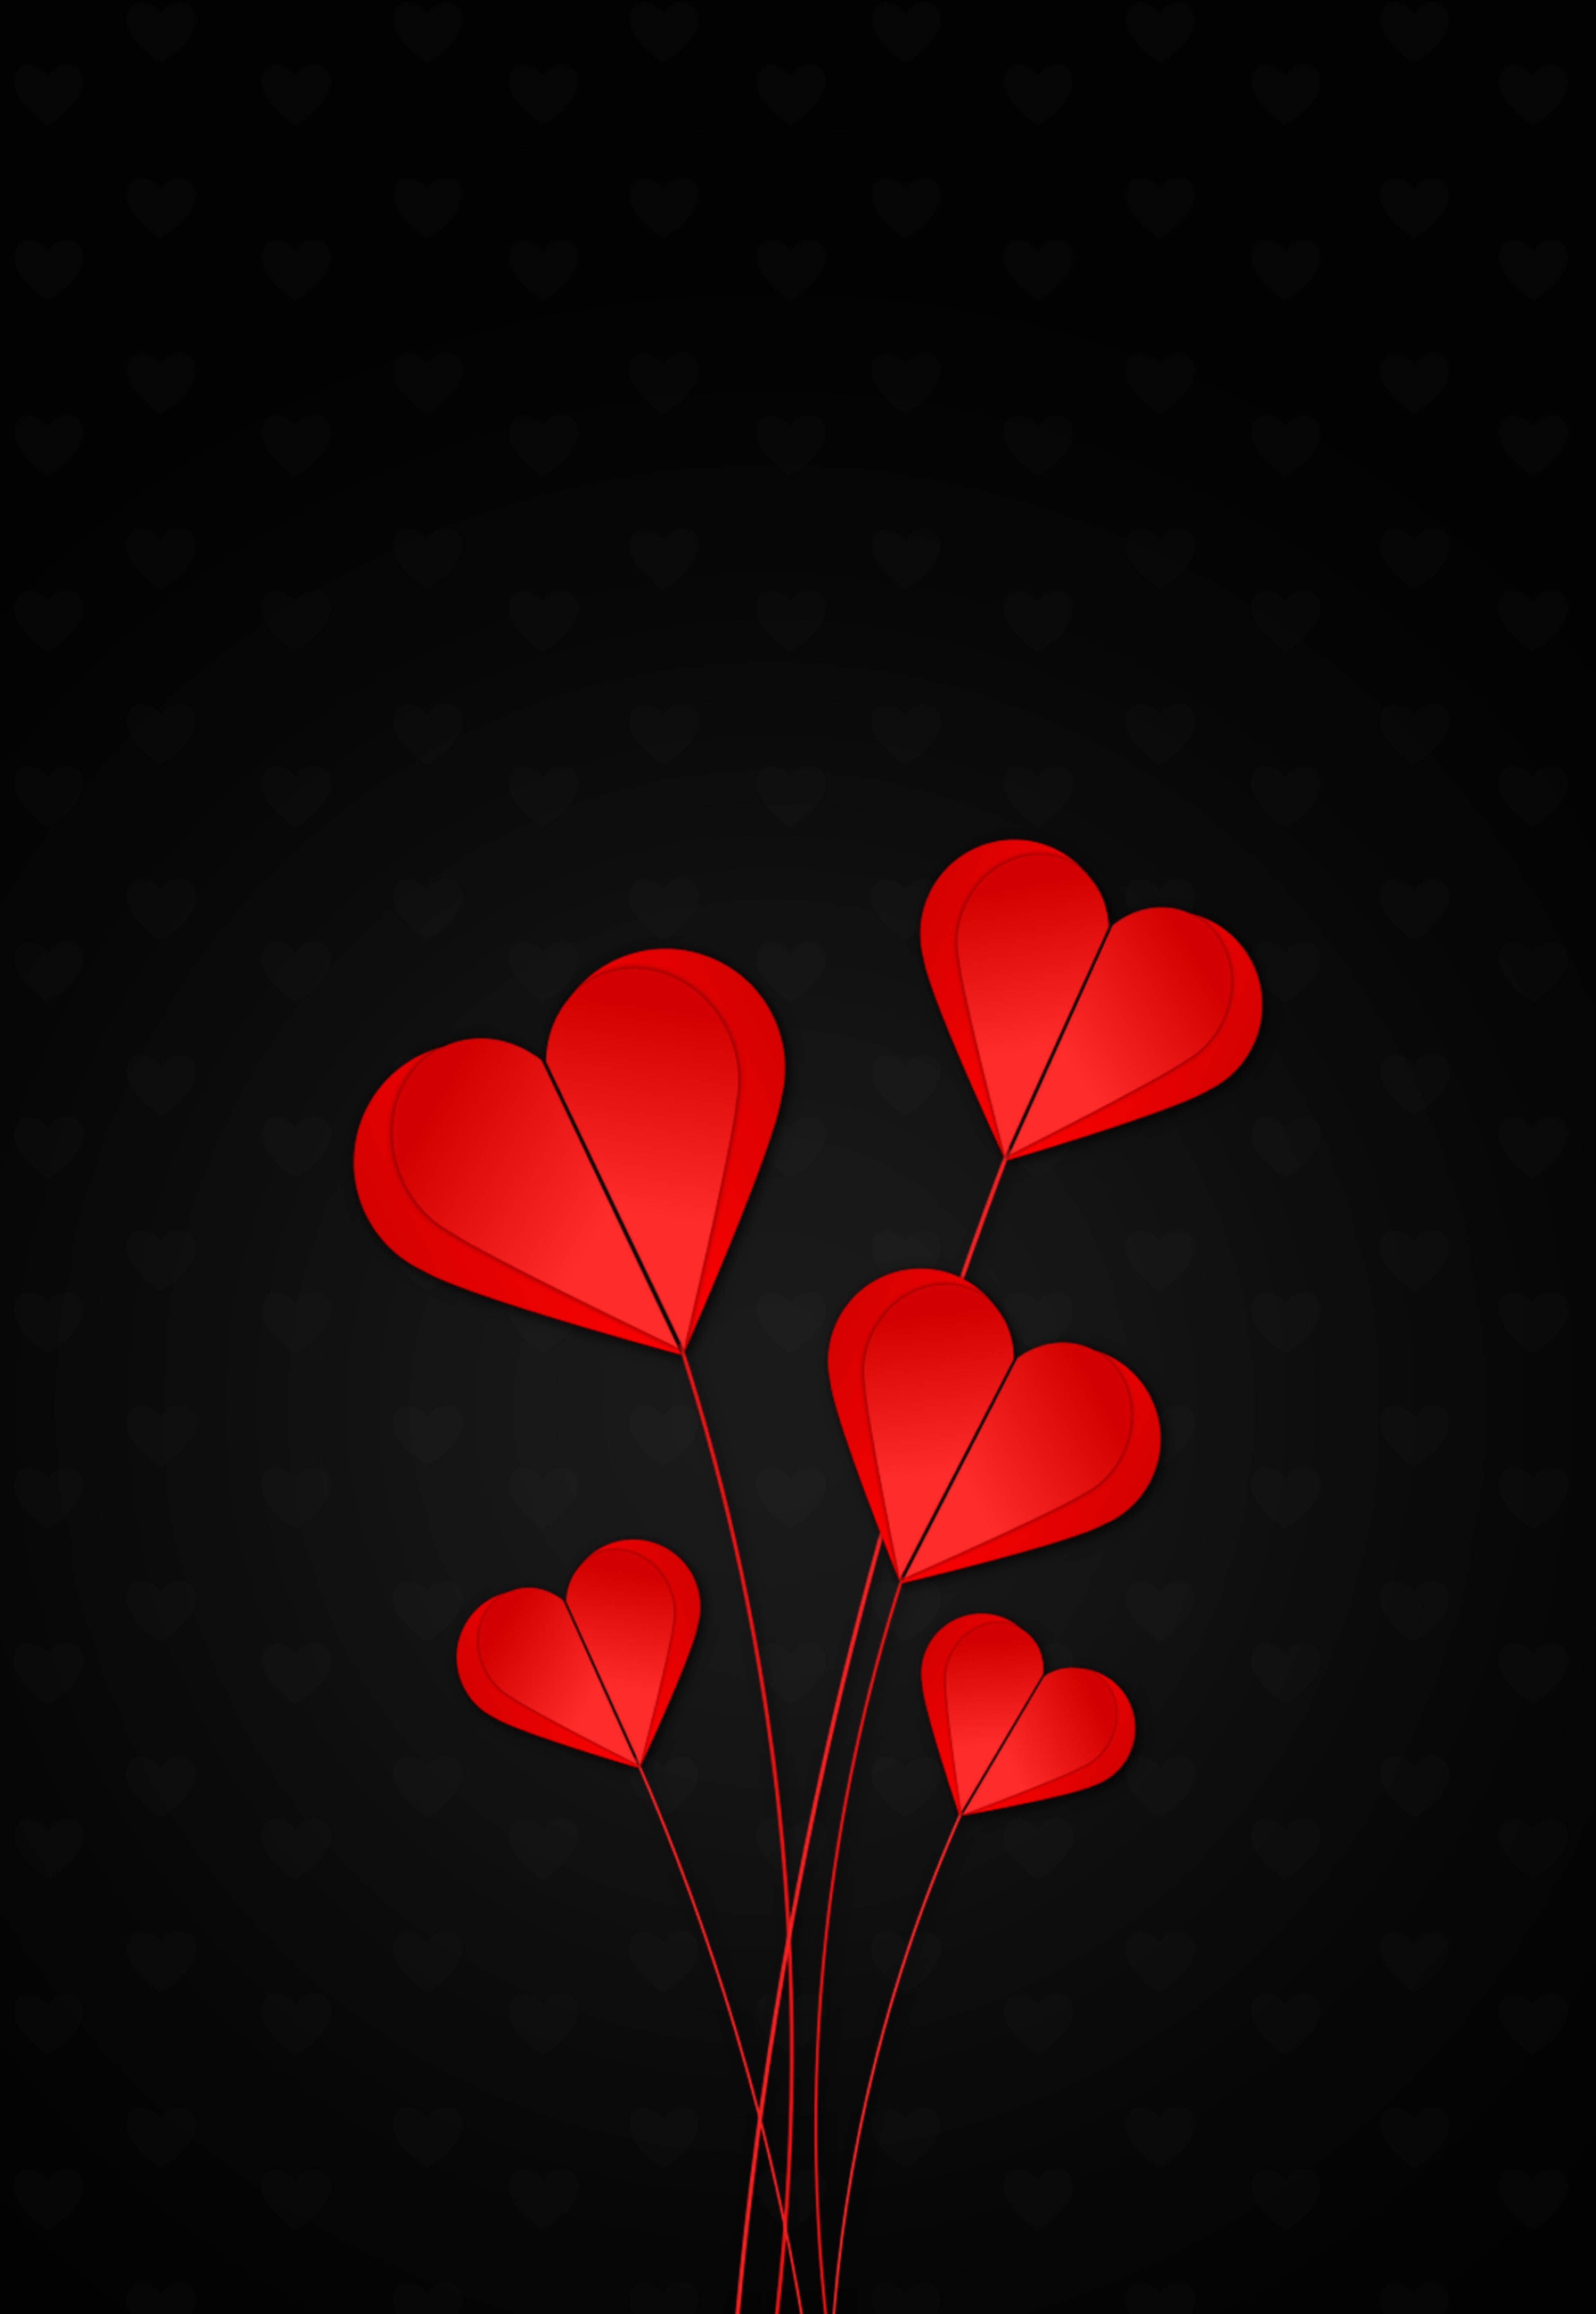 hearts, black background, love, red Smartphone Background